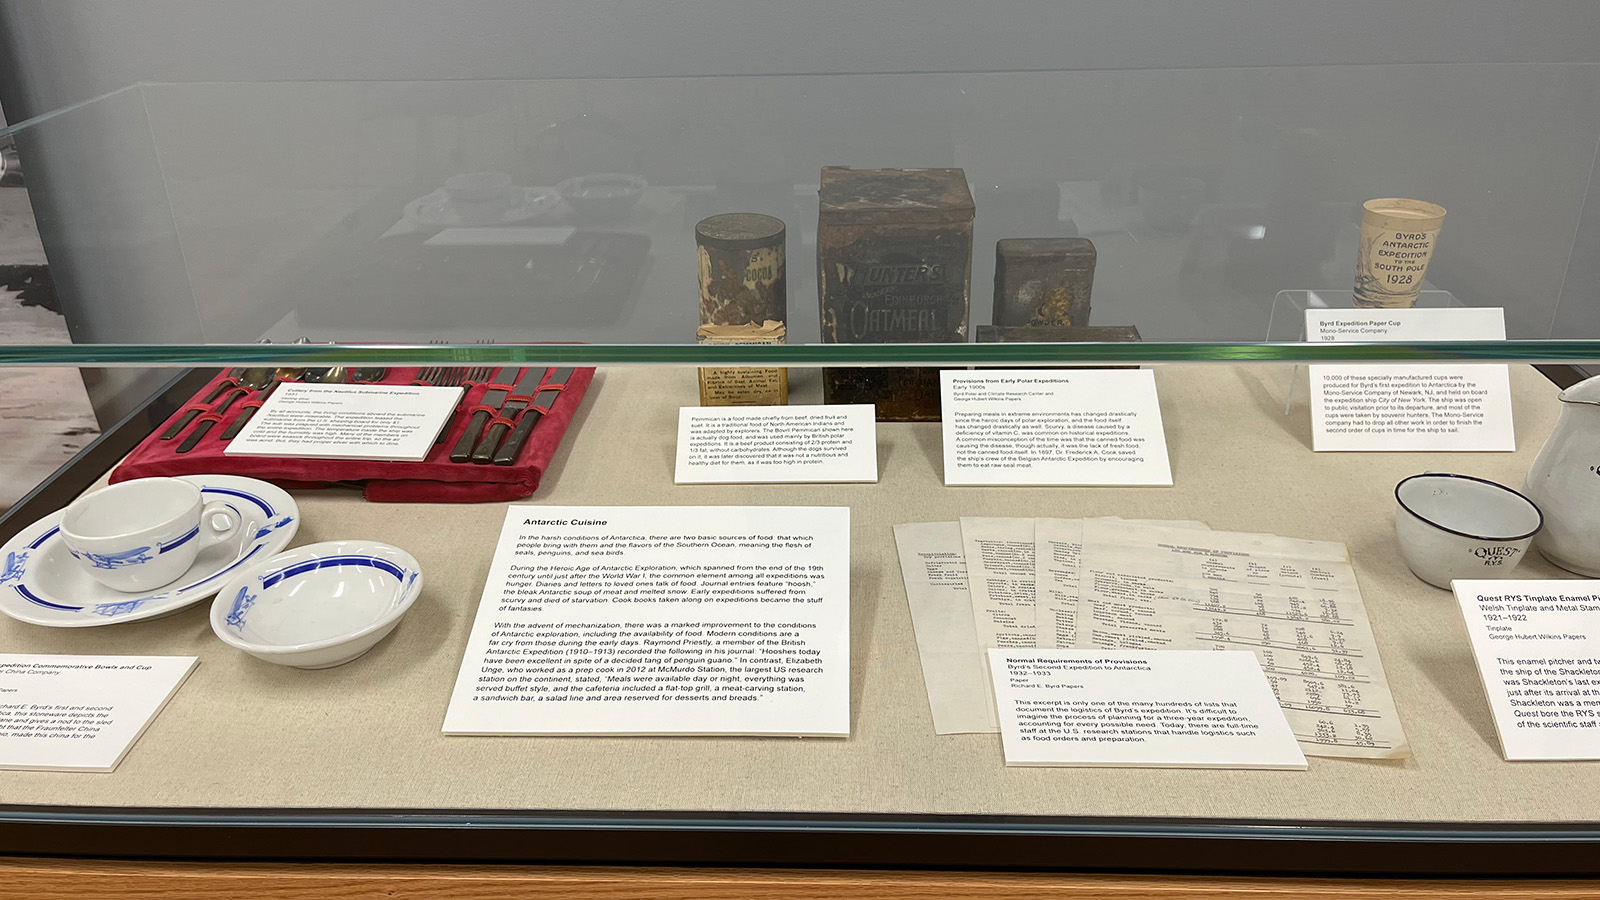 Archive exhibit showing cutlery, dishes and old food packaging.